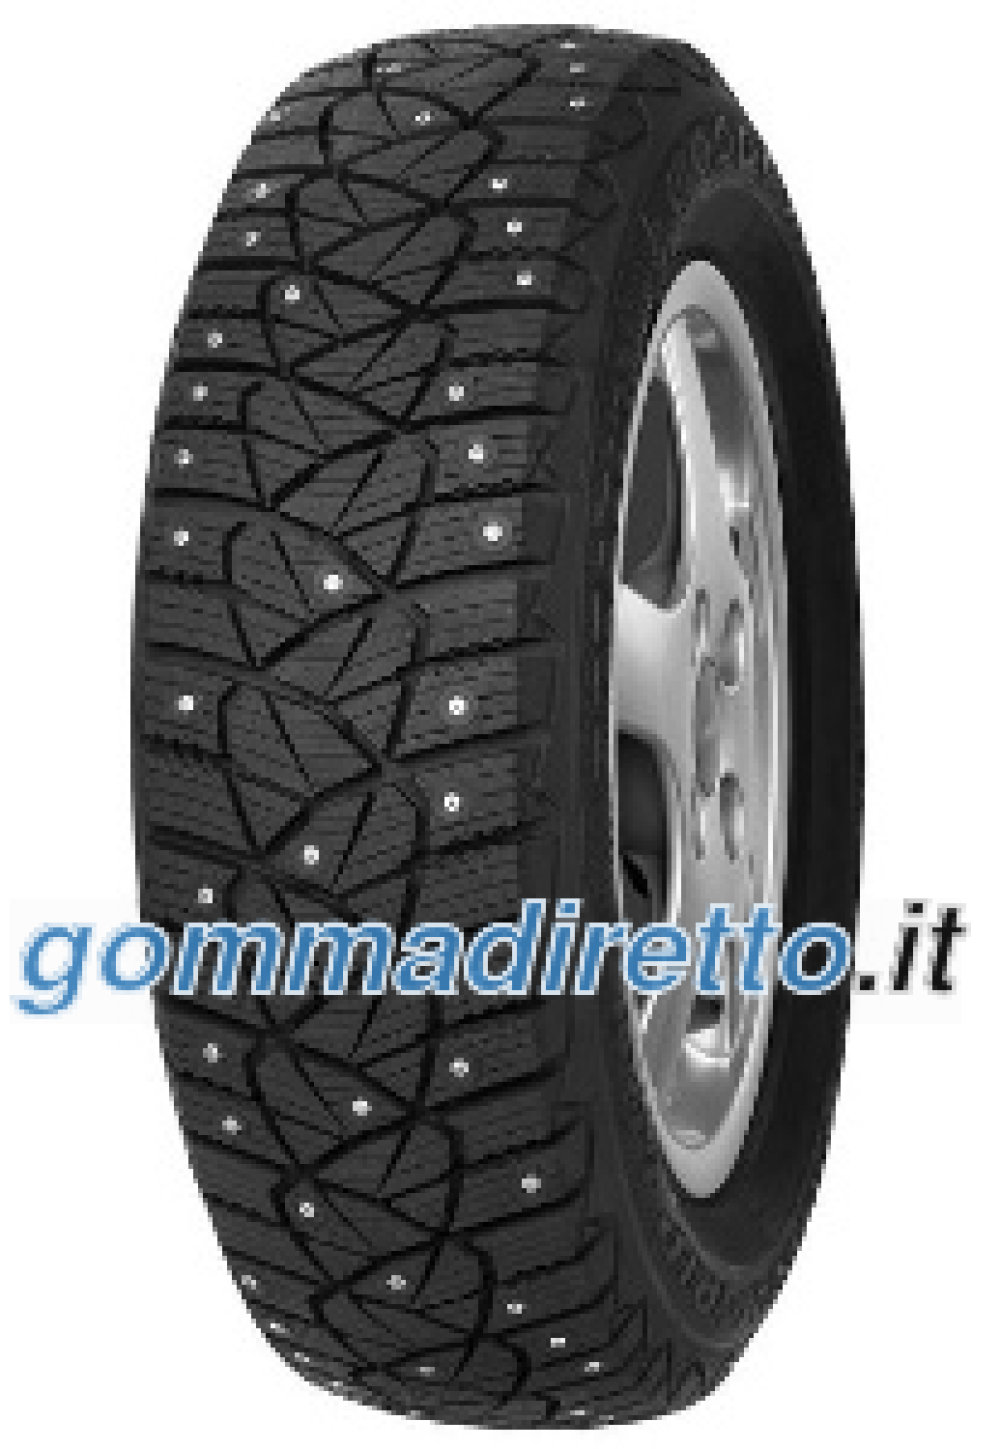 Image of Goodyear Ultra Grip 600 ( 215/55 R17 98T XL, pneumatico chiodato )